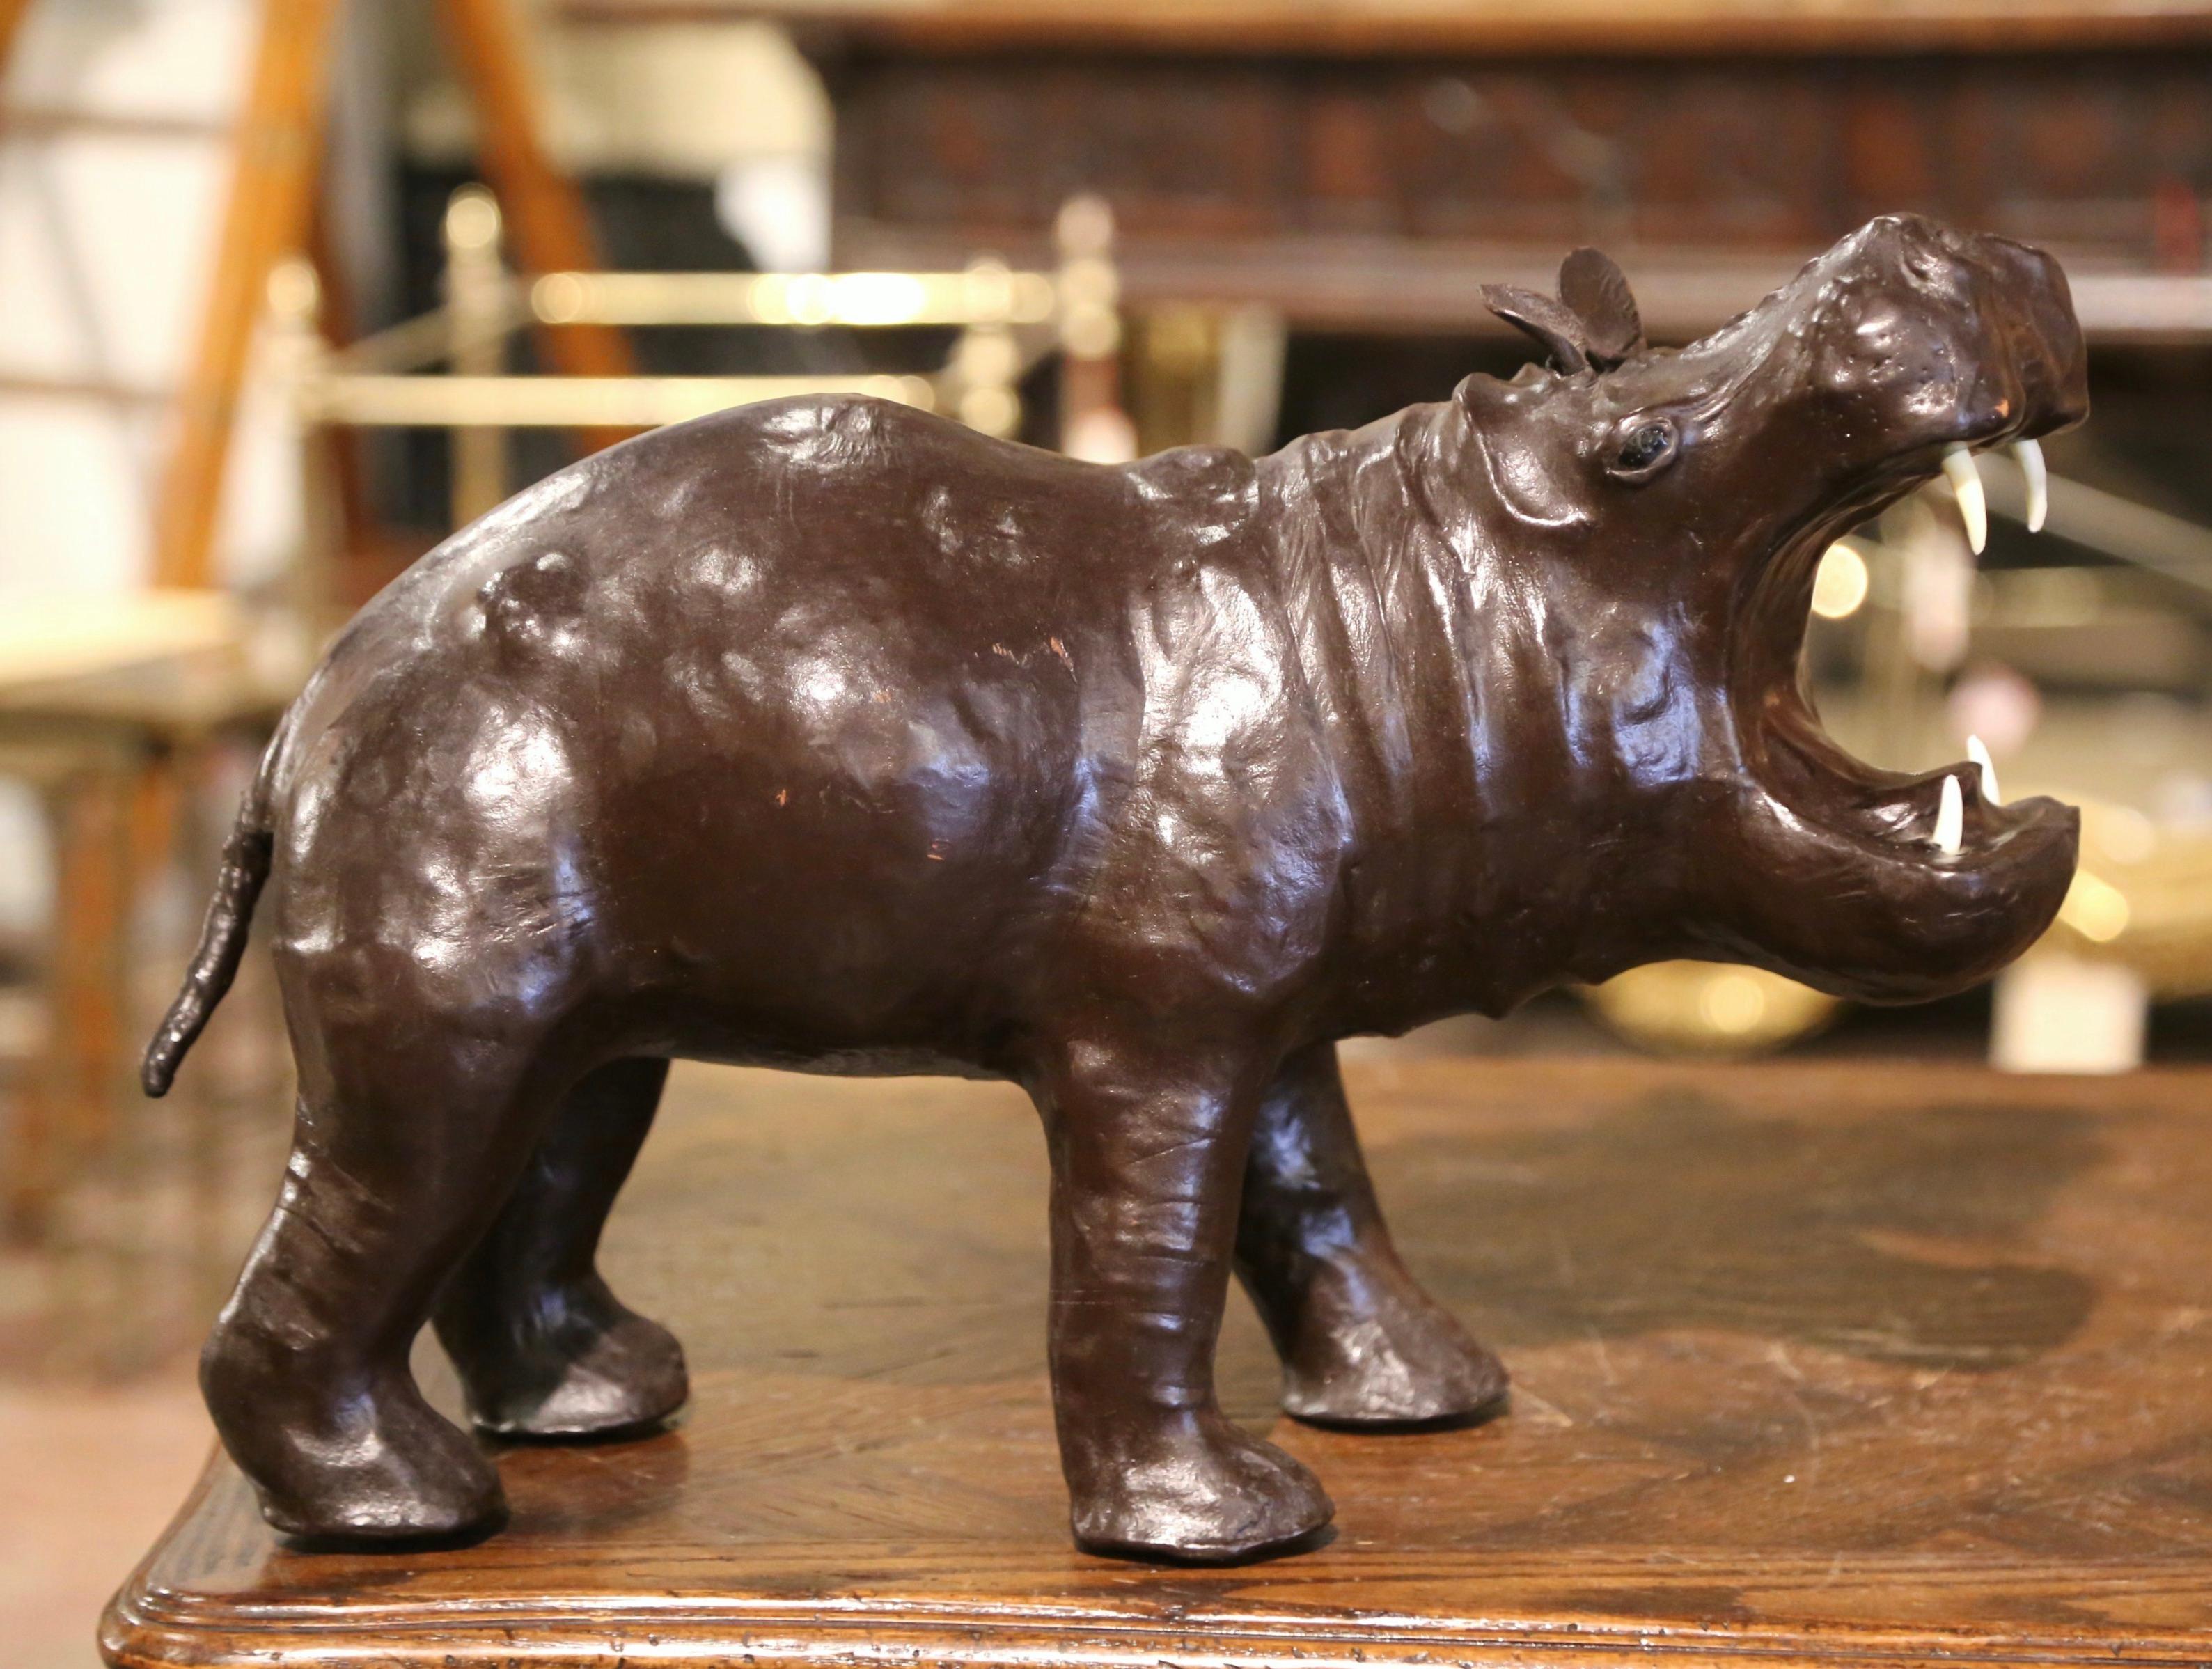 This beautiful, antique hippopotamus sculpture was crafted in France, circa 1920. The detailed leather figure standing on his four legs is in excellent condition and adorns a rich old patinated finish. the hippo's mouth is open as if it was roaring